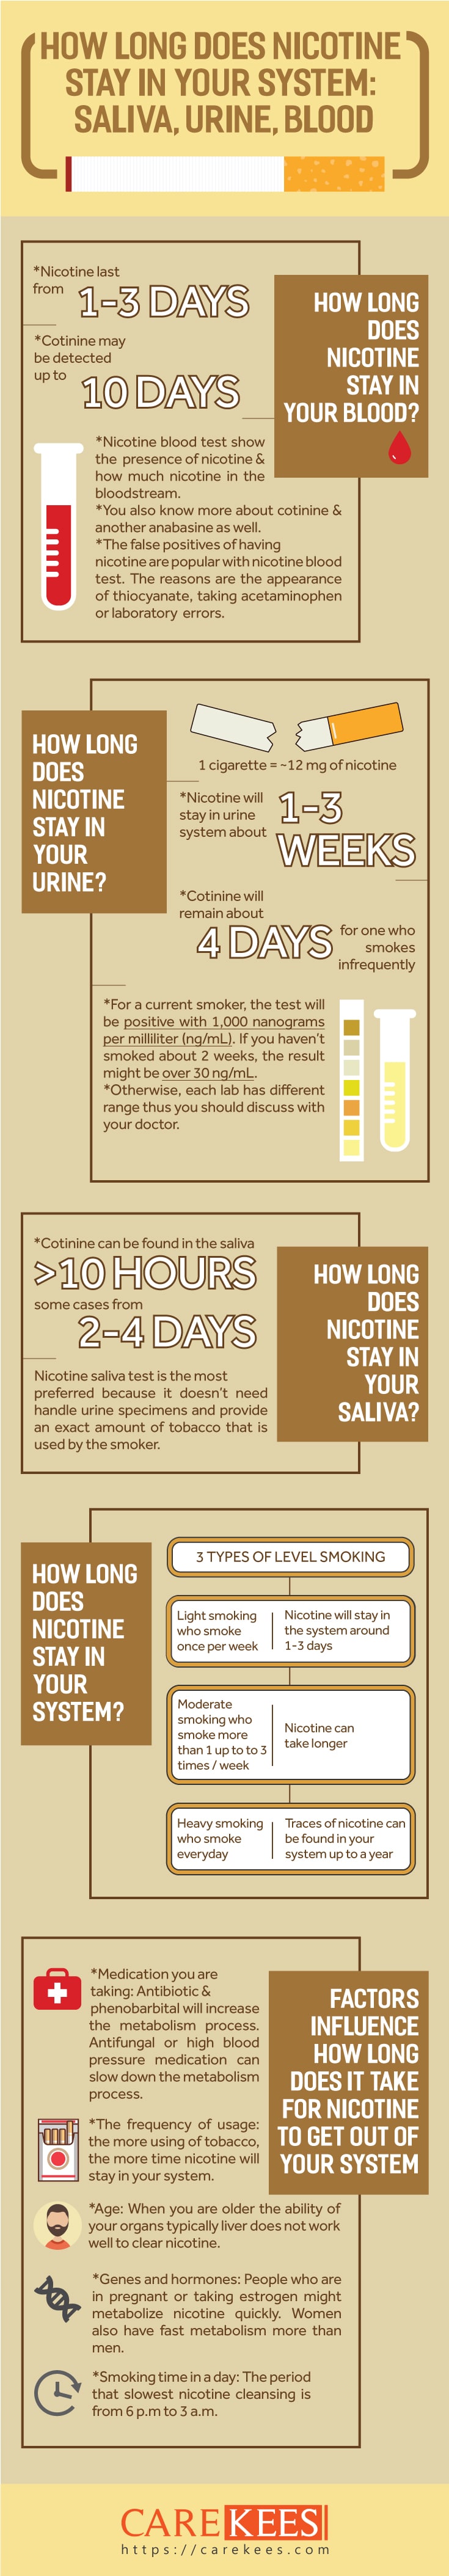 How long does nicotine stay in your system 